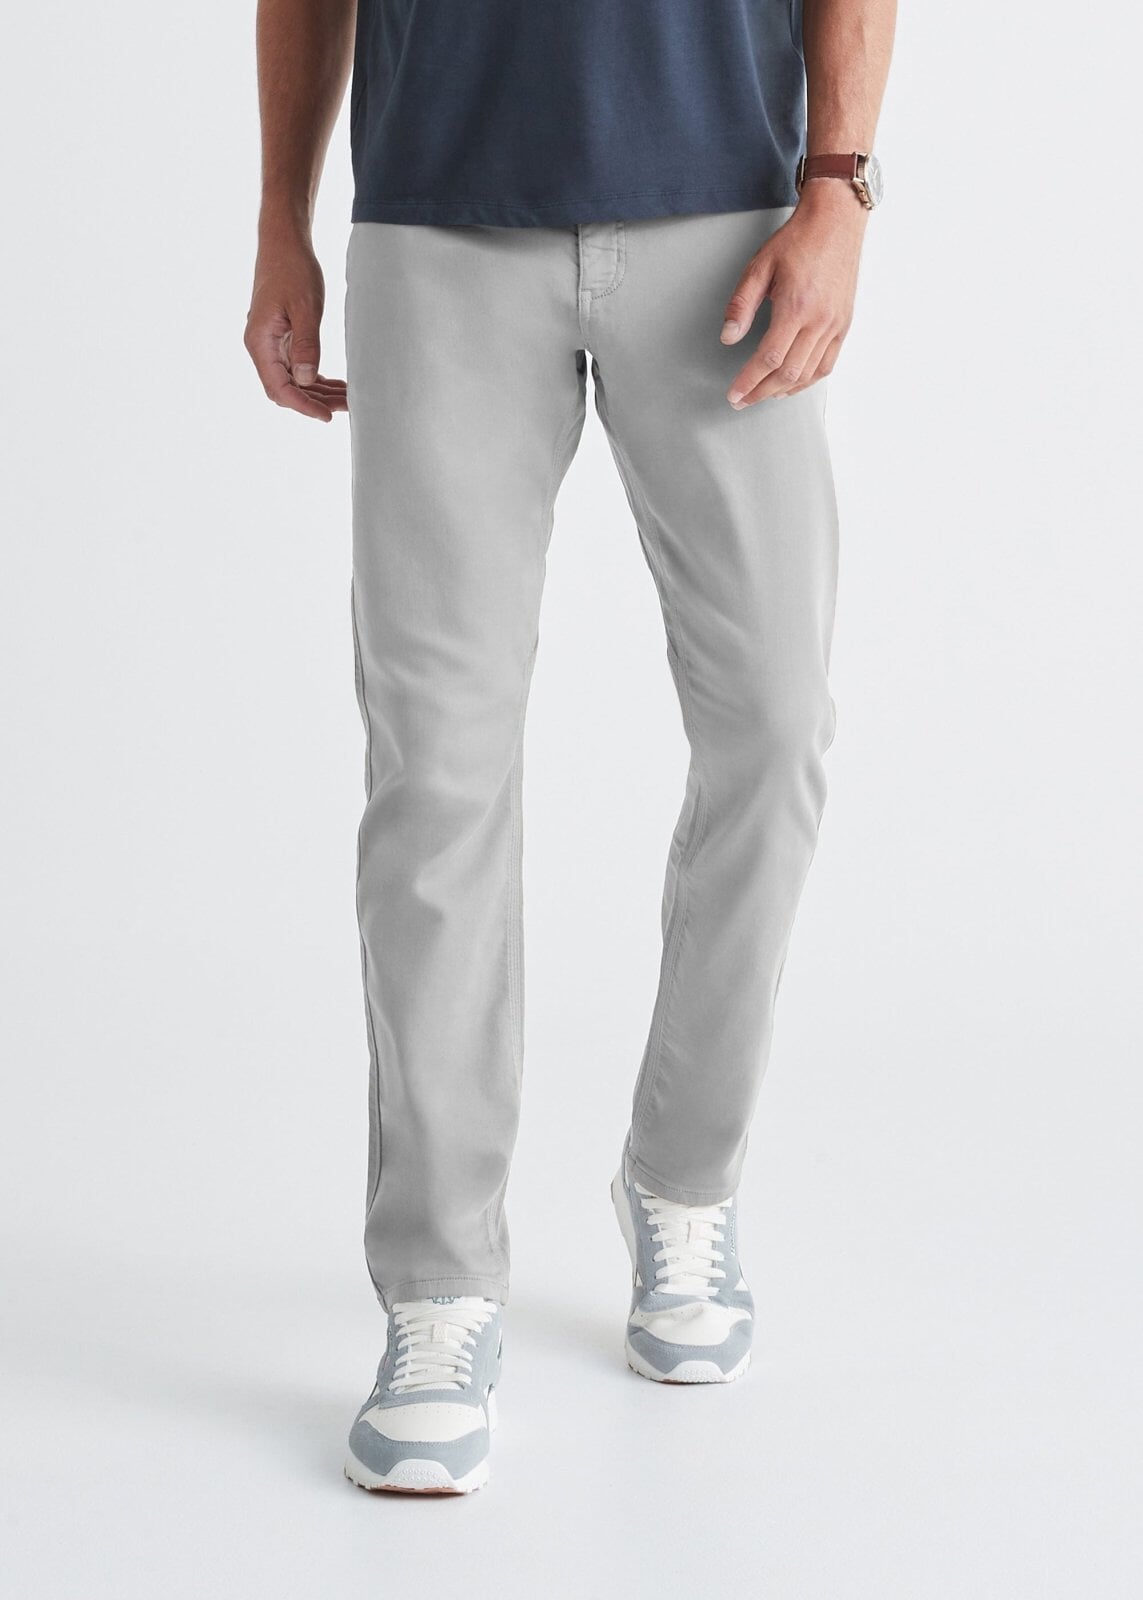 Men's Relaxed Fit Dress Sweatpant